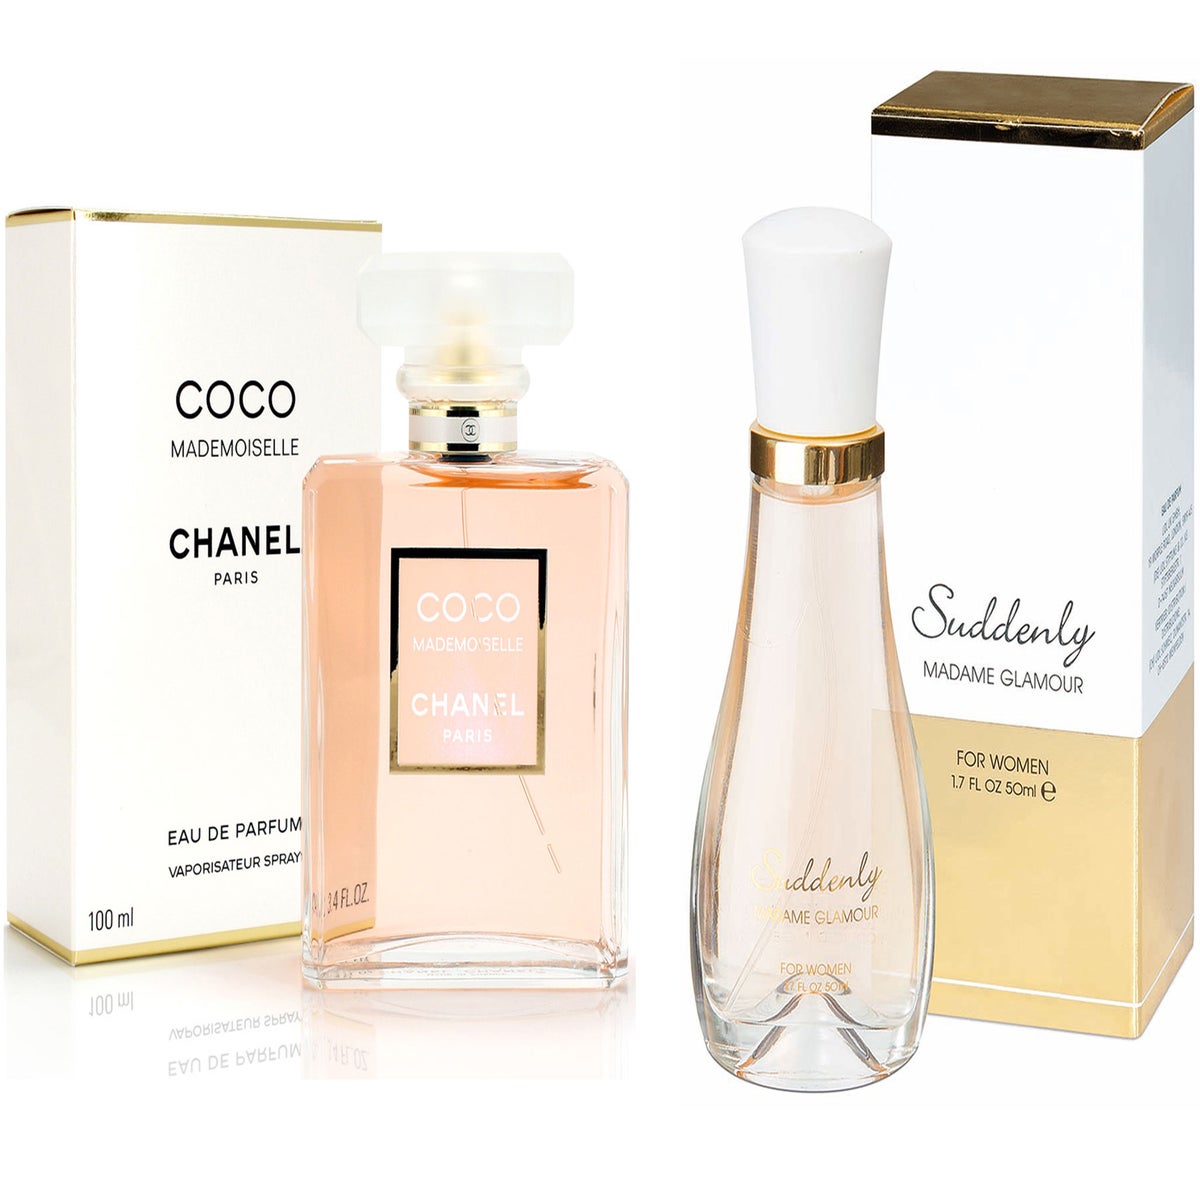 Revealed: Lidl's £4 perfume smells identical to Chanel's £70 scent - but  the difference is in the bottle, The Independent